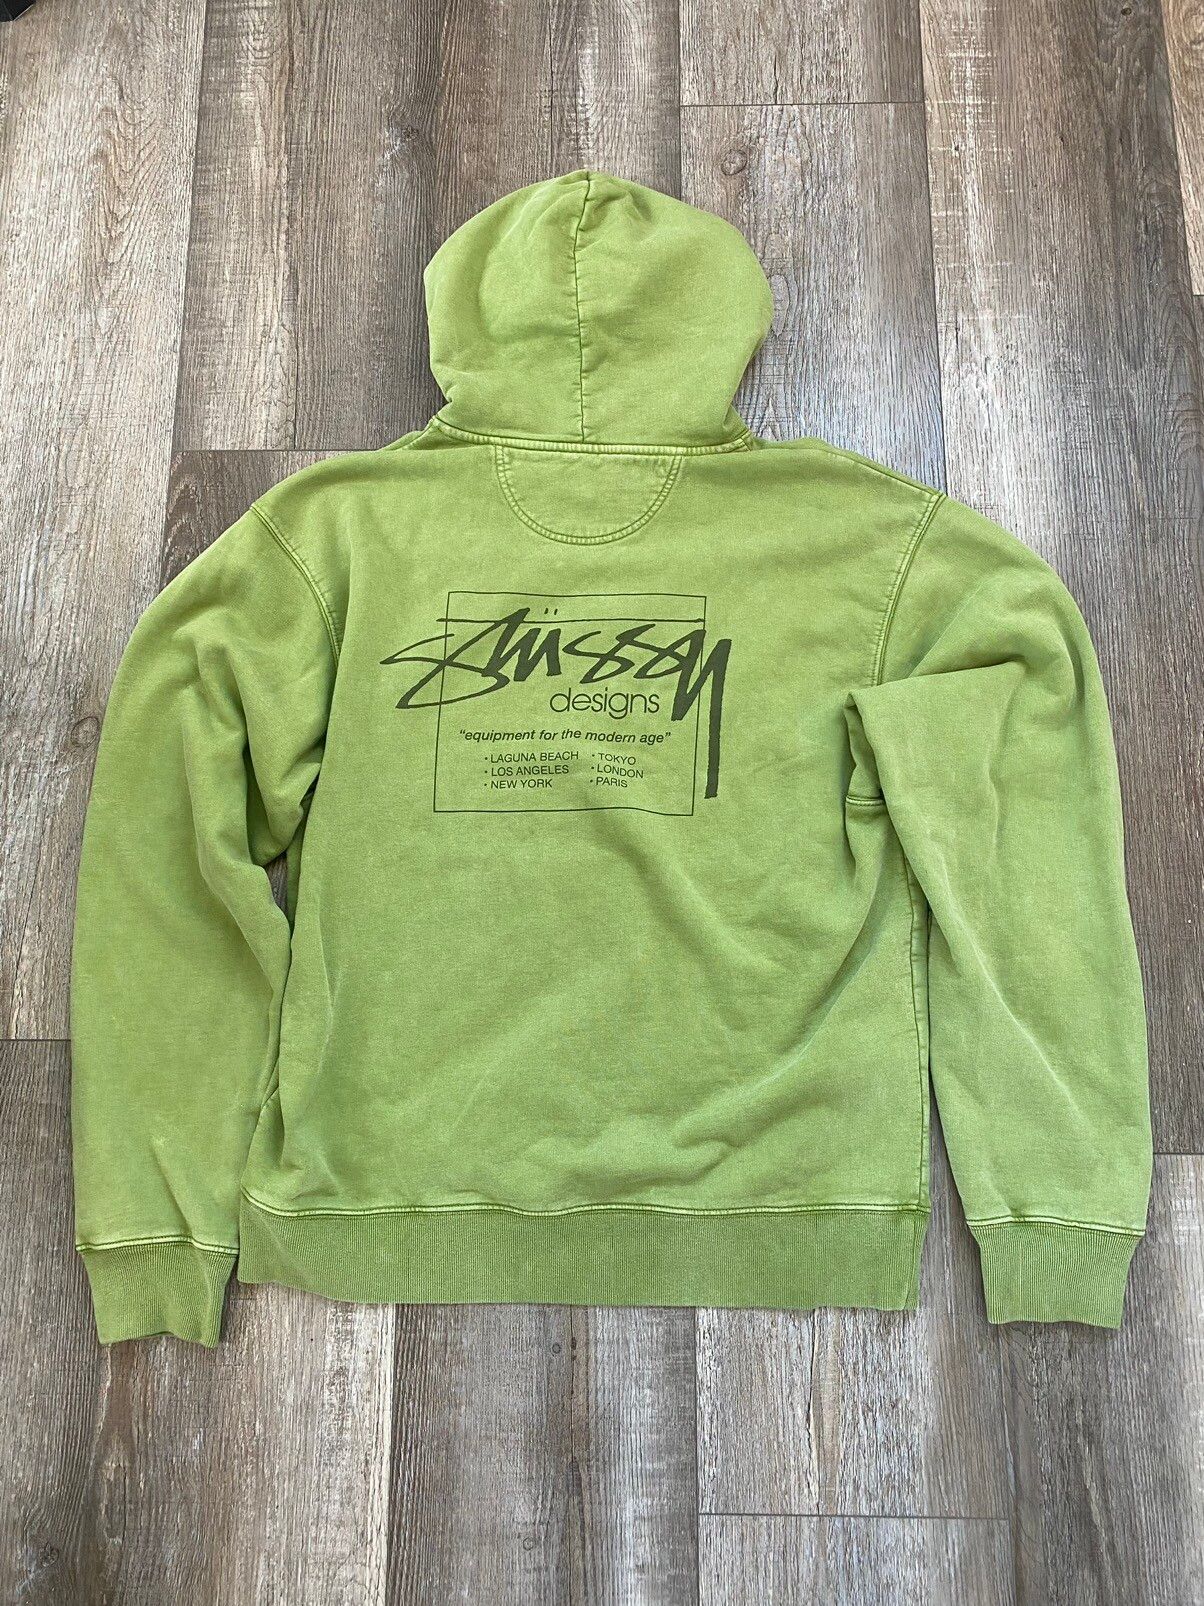 Stussy Over-dyed Stussy Designs Hoodie Size US XL / EU 56 / 4 - 2 Preview